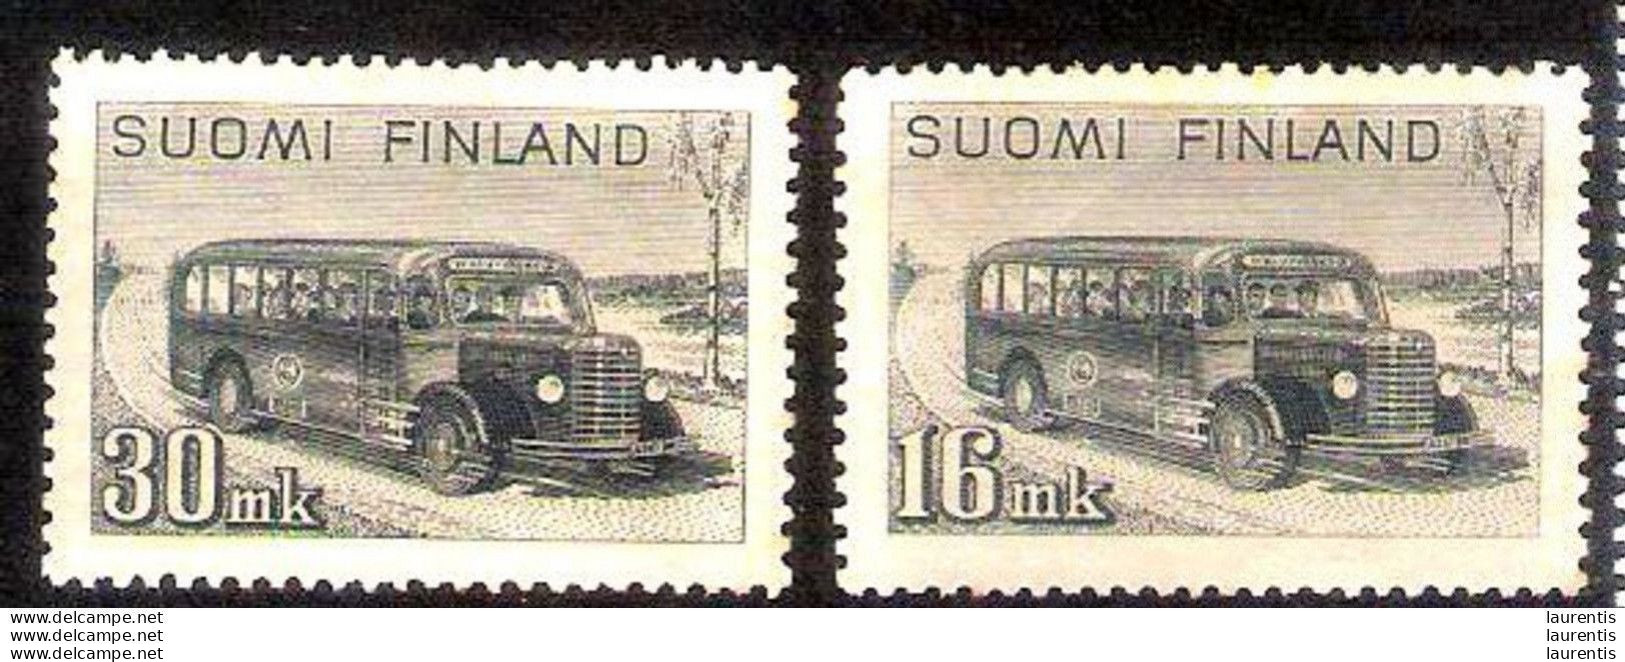 3174  Buses - Finland Yv 315-16 - Hinged - Lightly Toned Gum - 1,15 .(5) - Bus